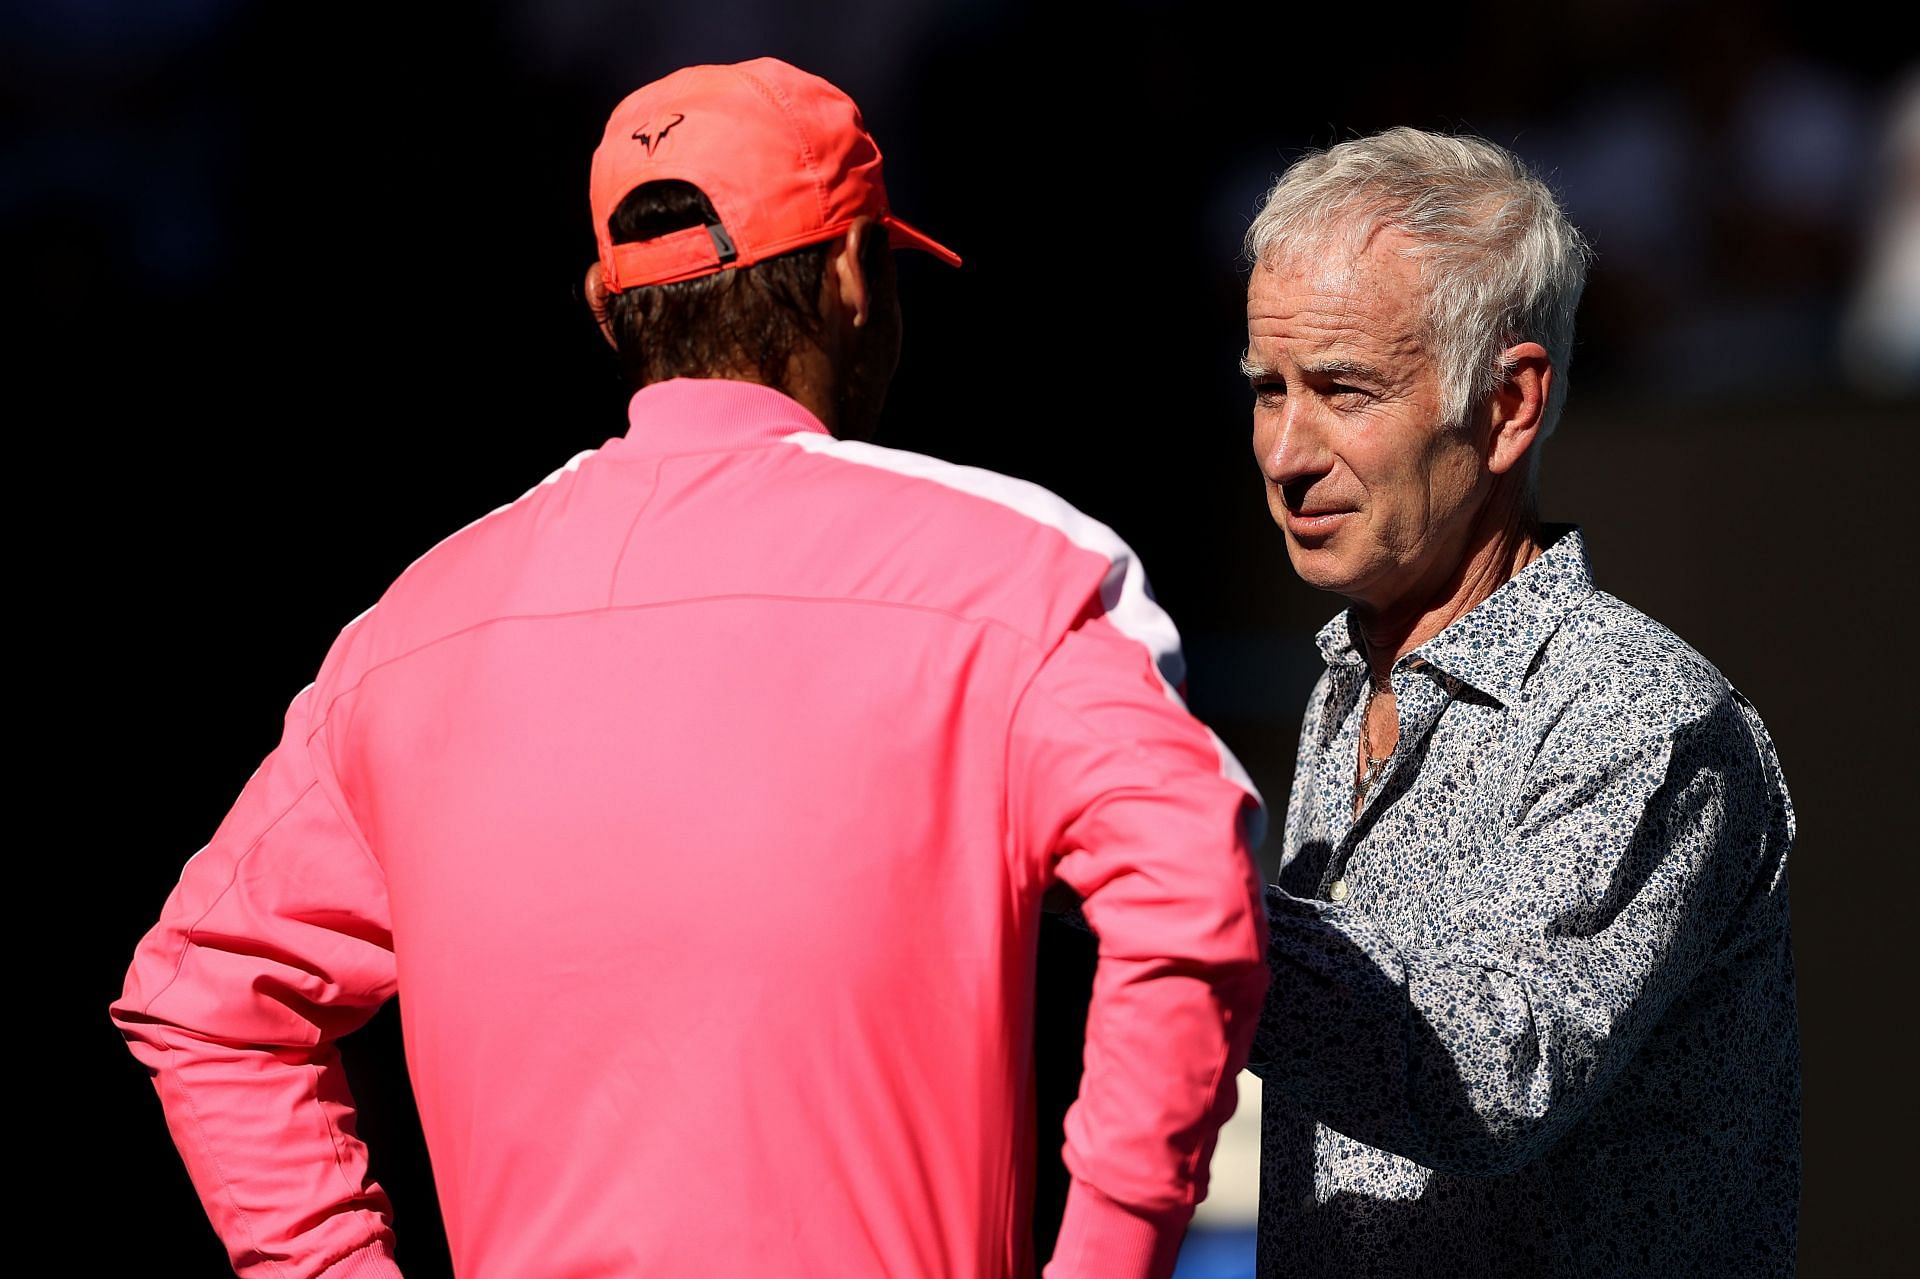 The Spaniard speaks with John McEnroe at the 2020 Australian Open - Getty Images